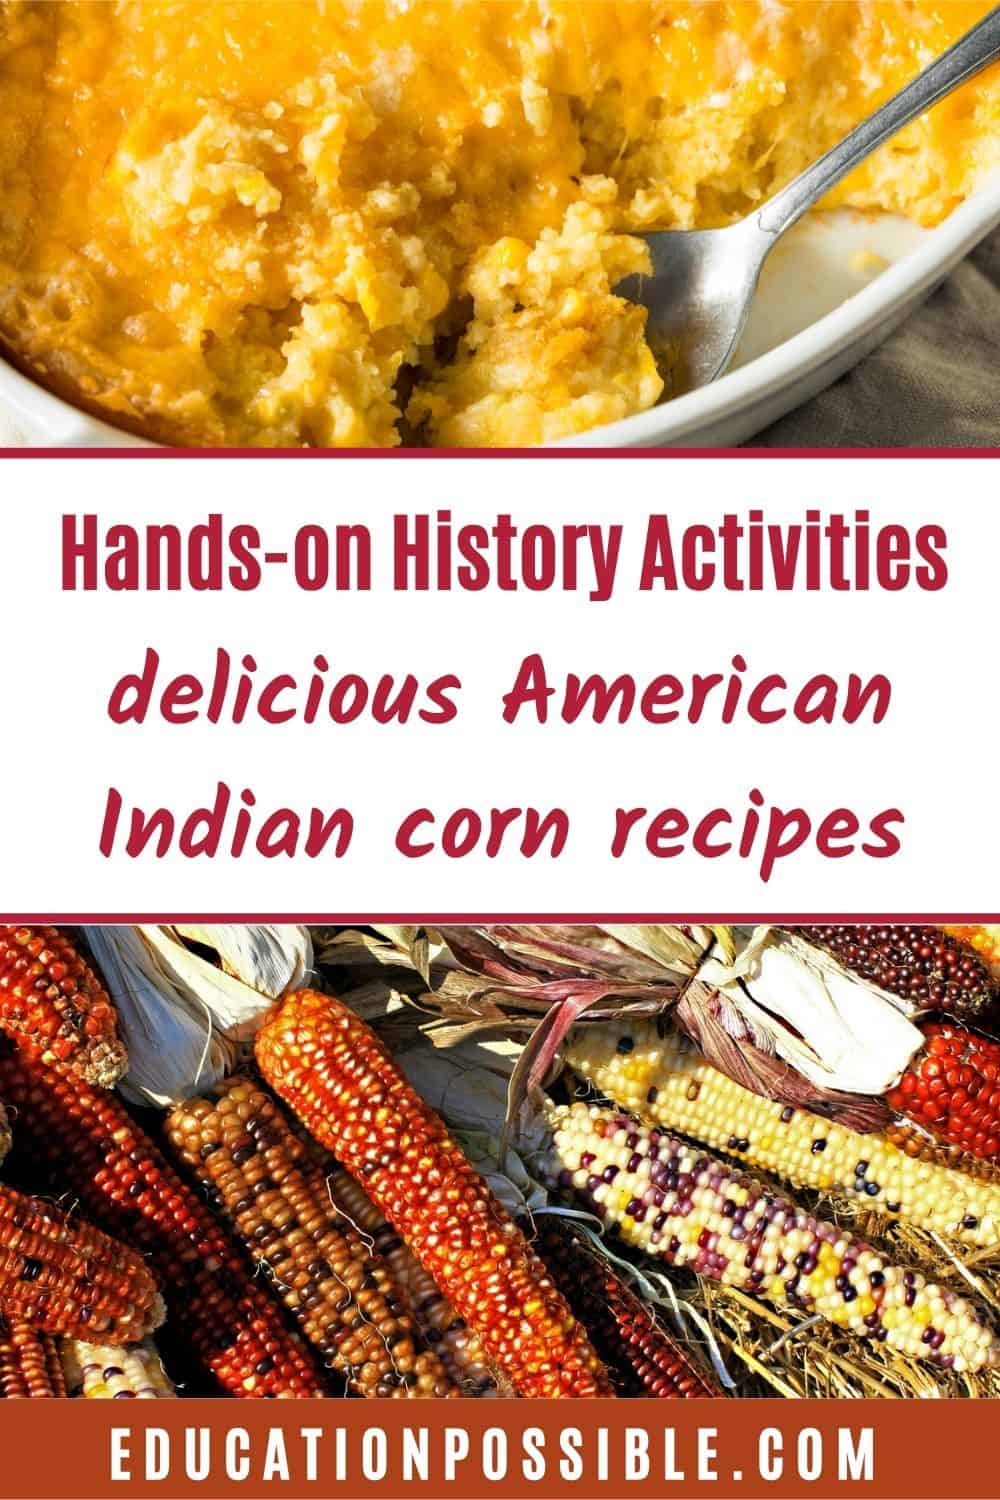 Hands-on Learning with Native American-Themed Corn Recipes